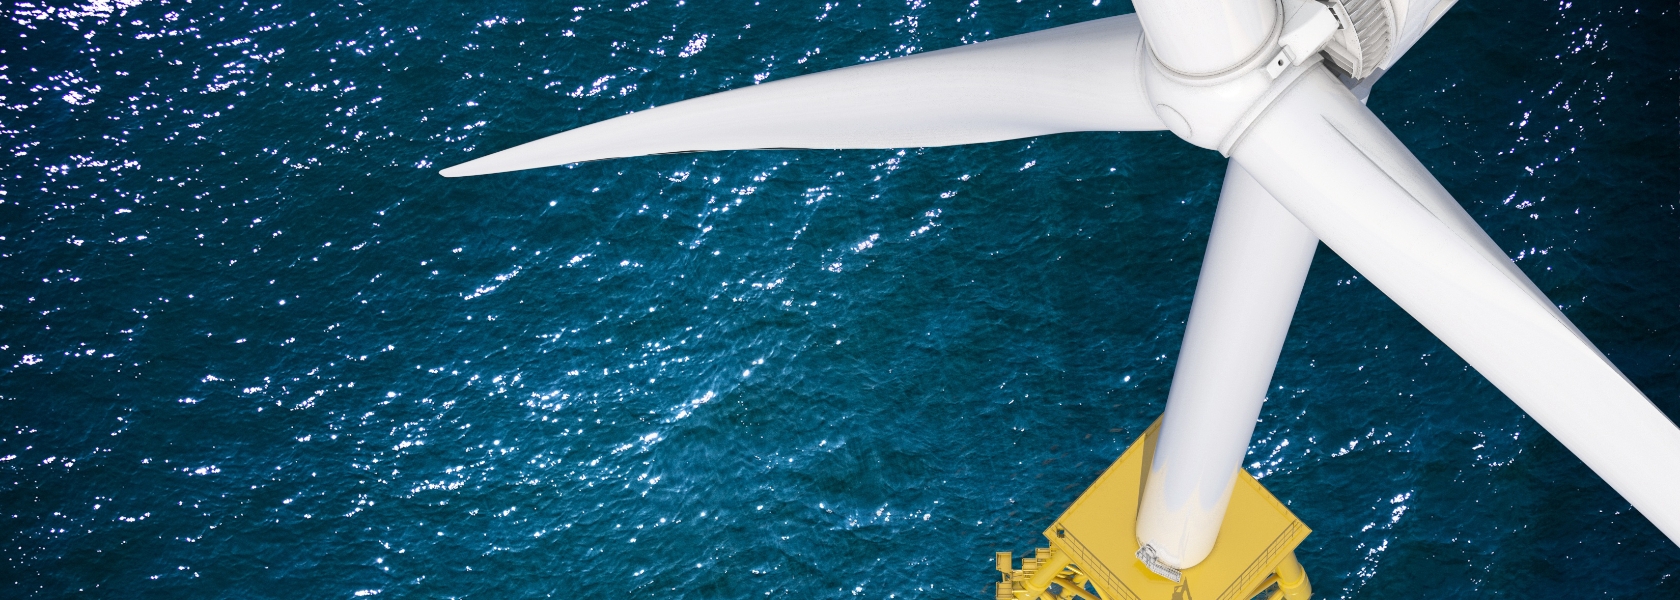 FIRST IN AMERICAN OFFSHORE WIND